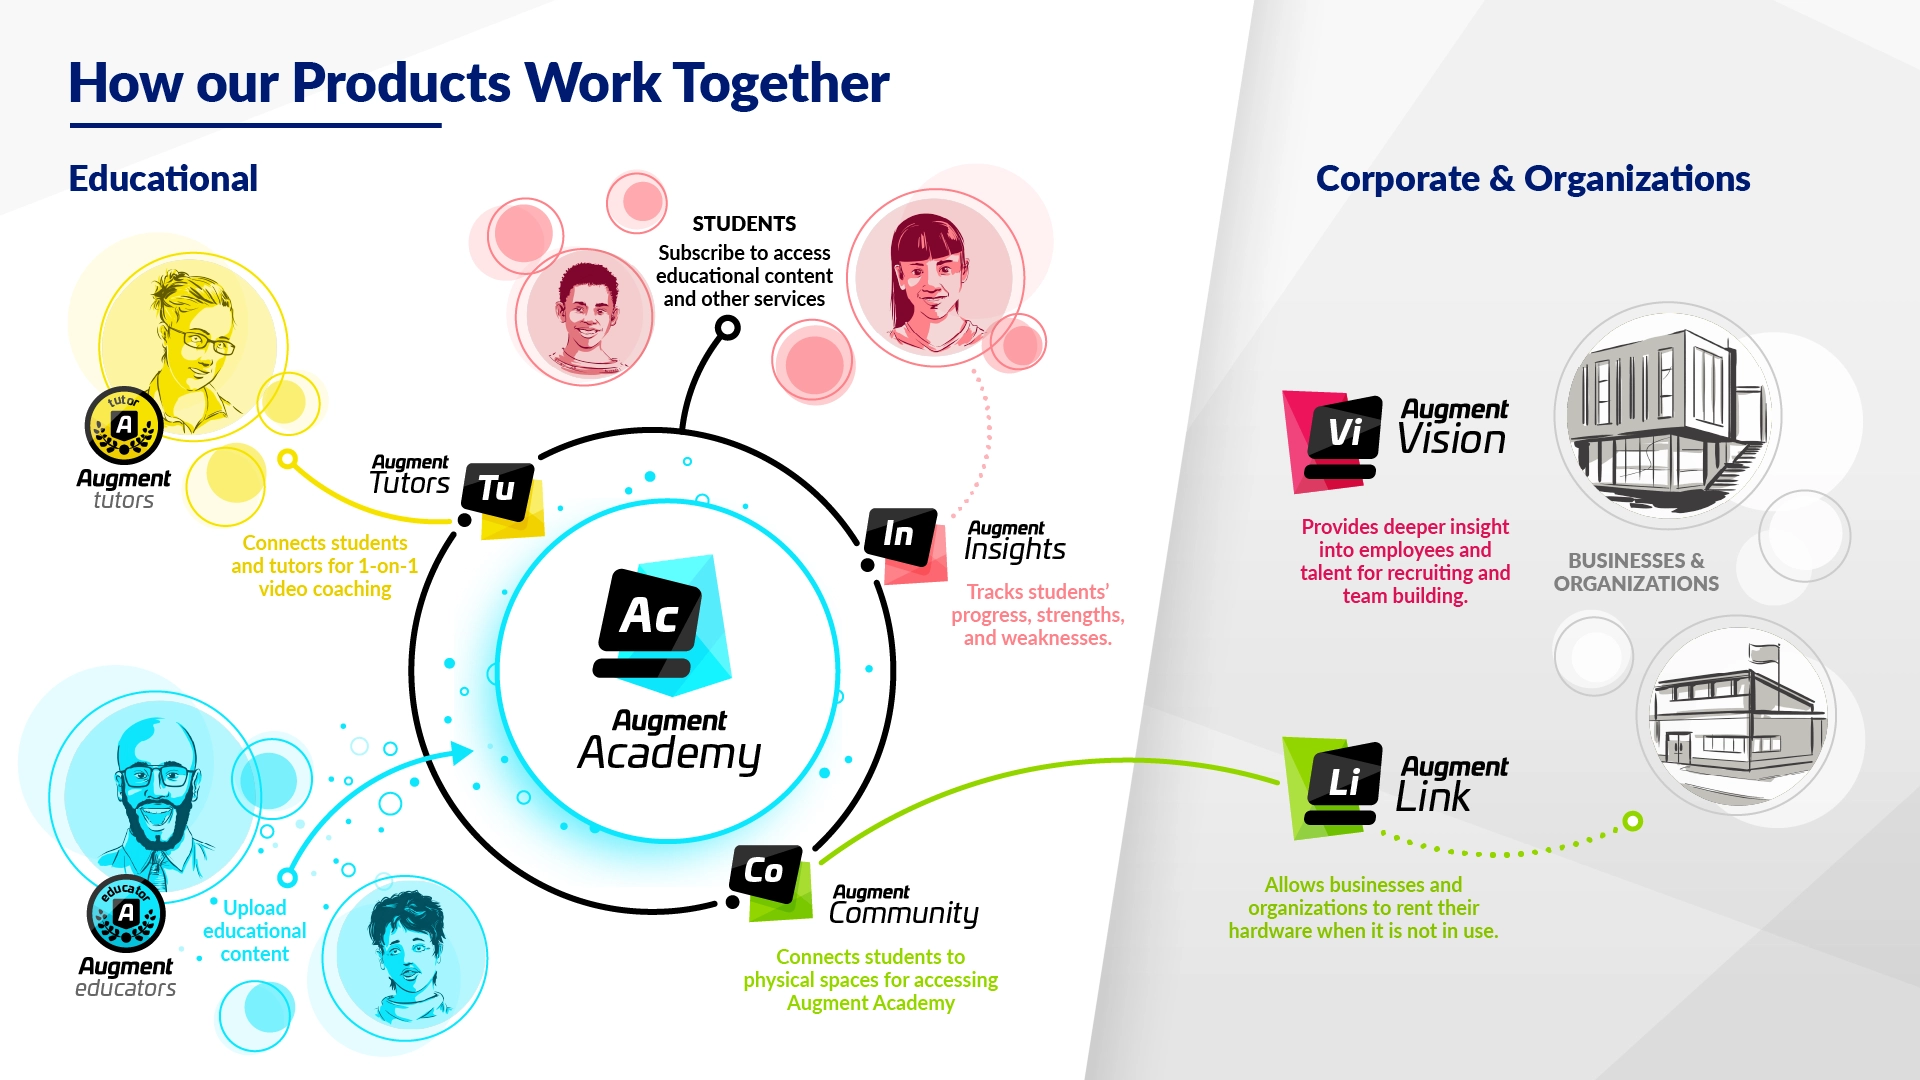 How Augment products work together